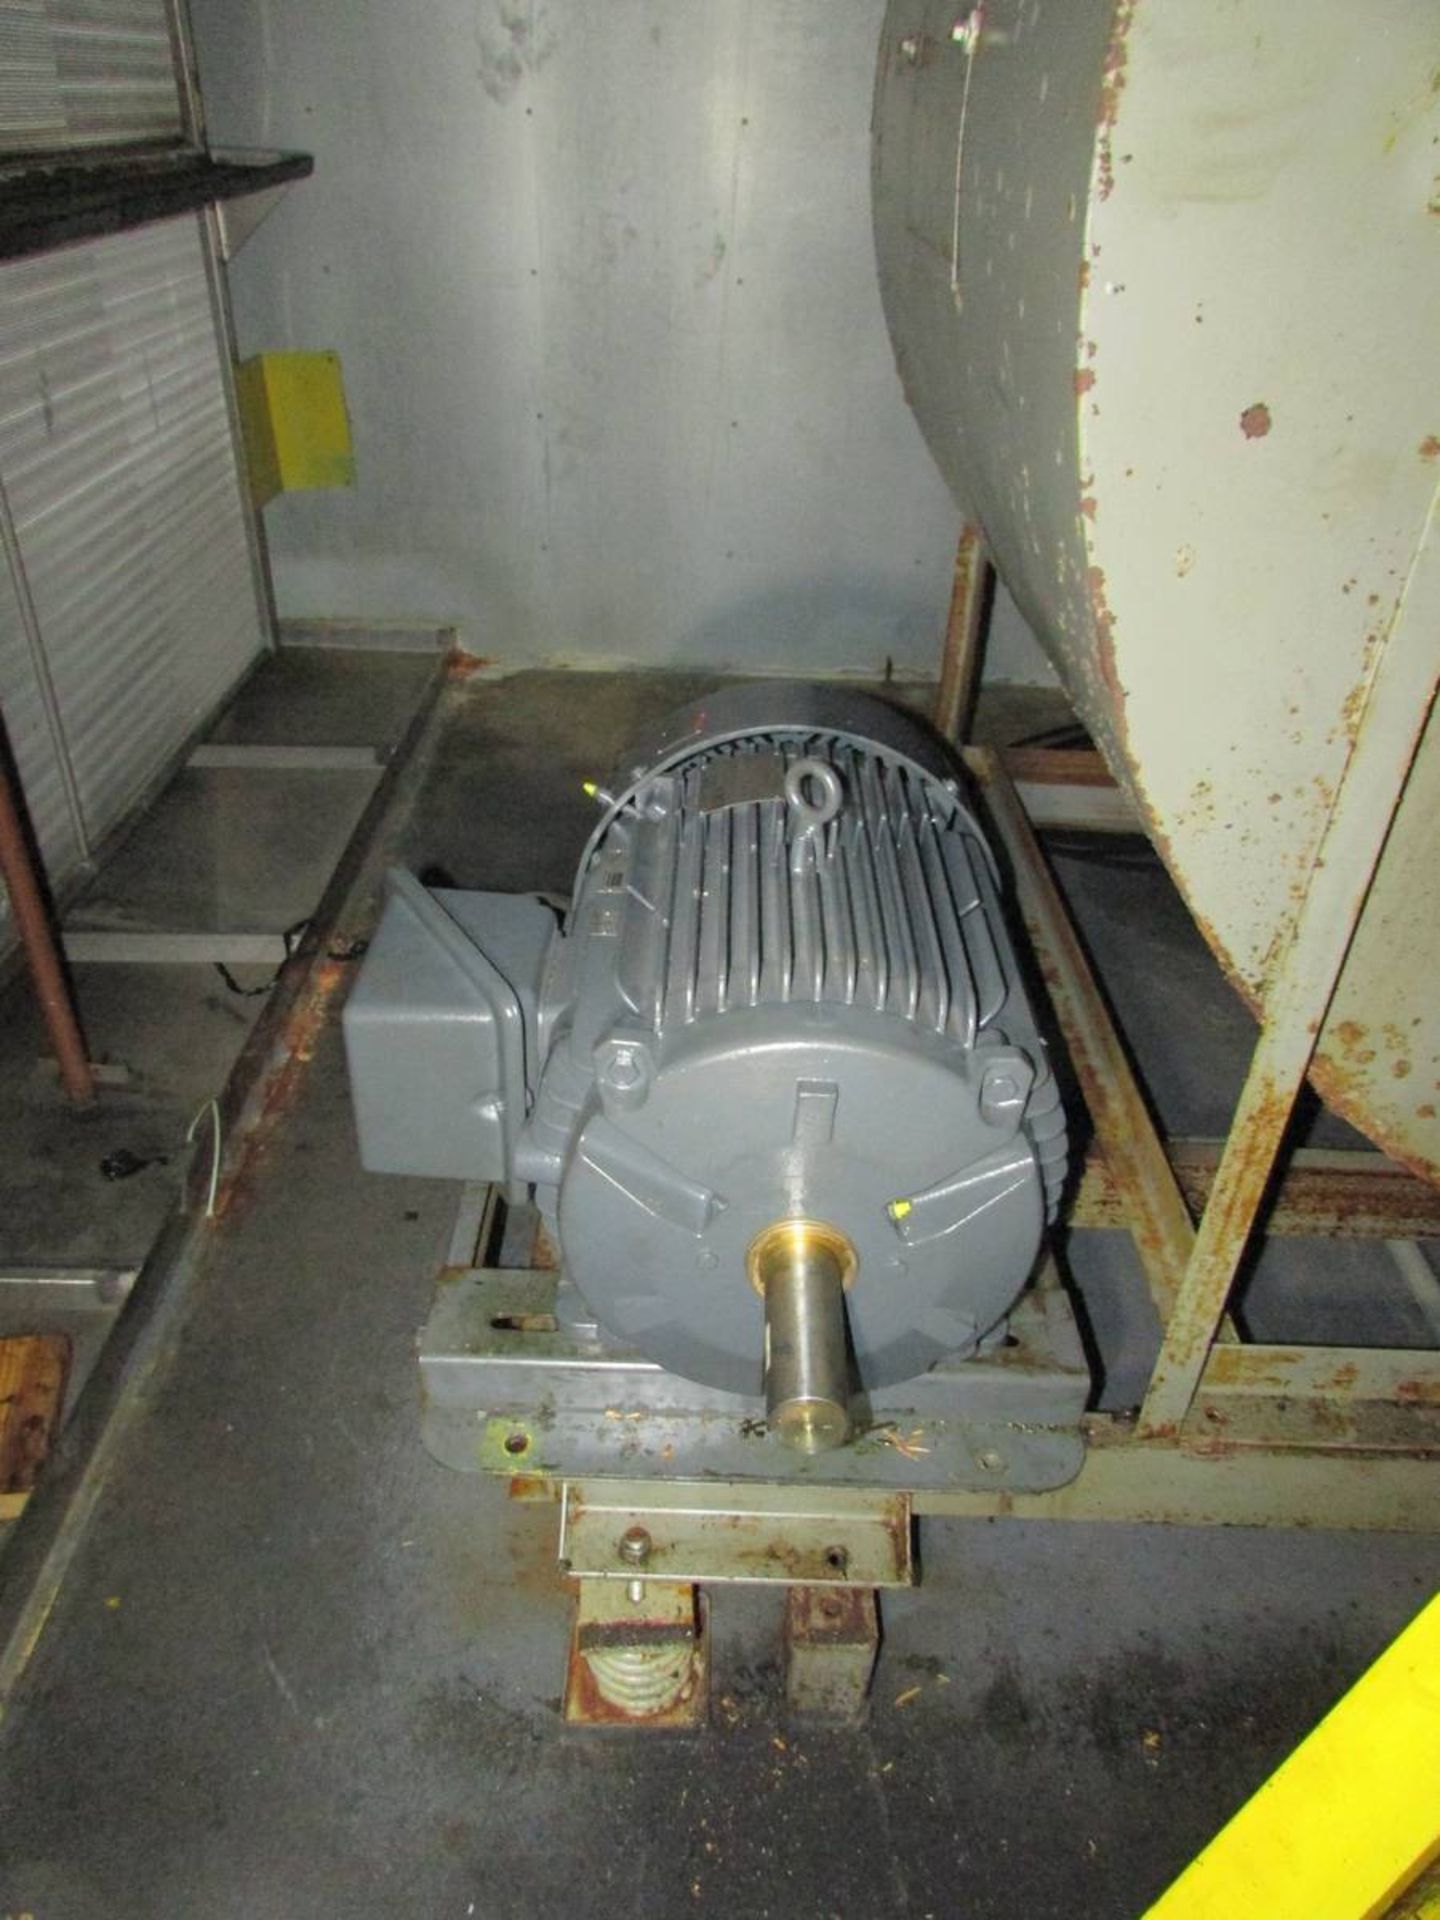 2000 Webco CUS-35 Overhead Air Handling Unit - Image 12 of 16